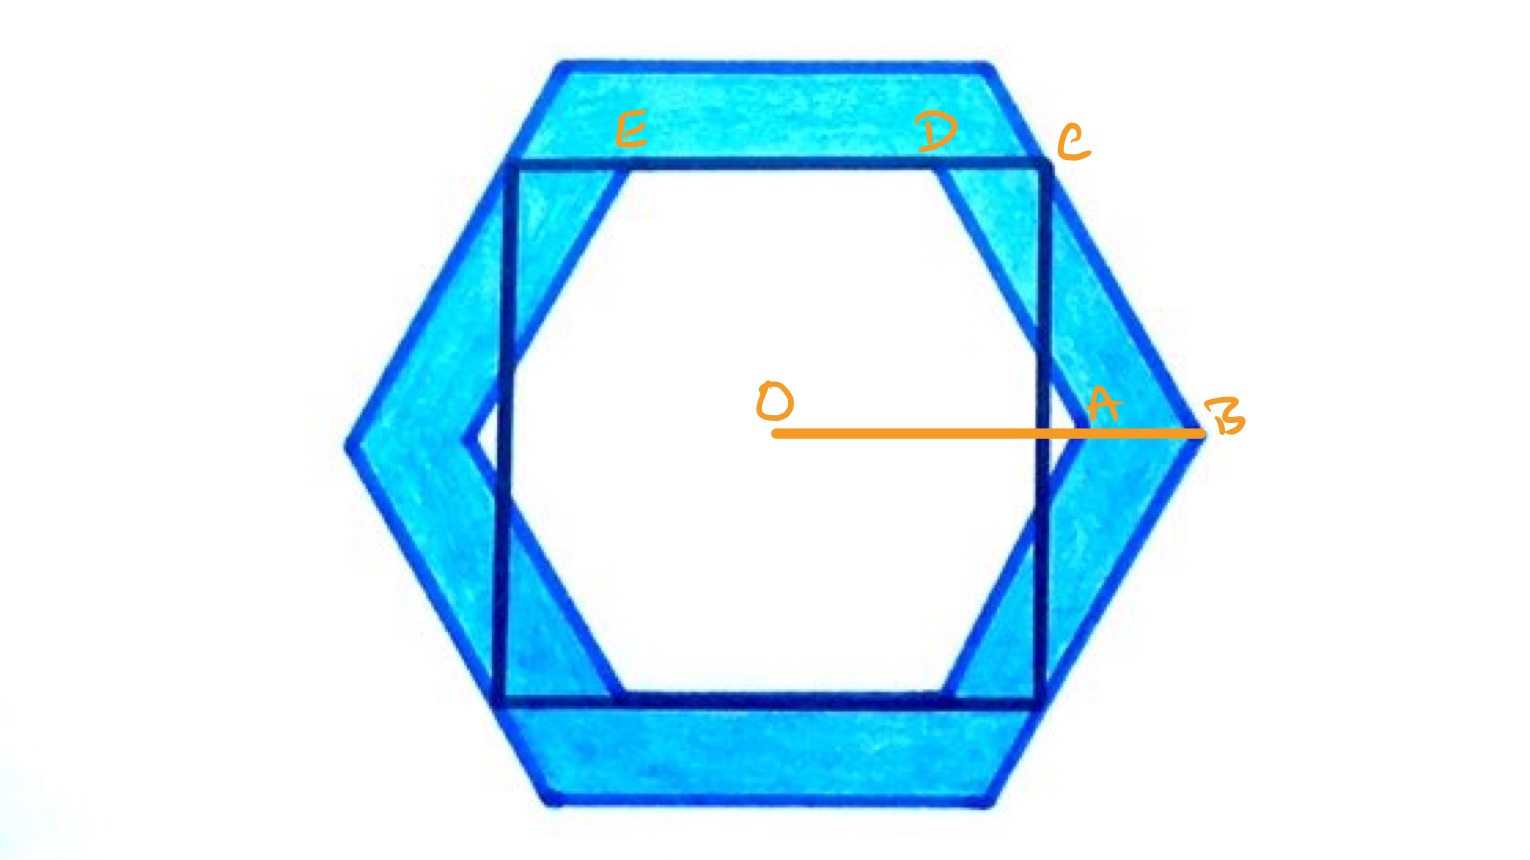 Two hexagons and a square labelled